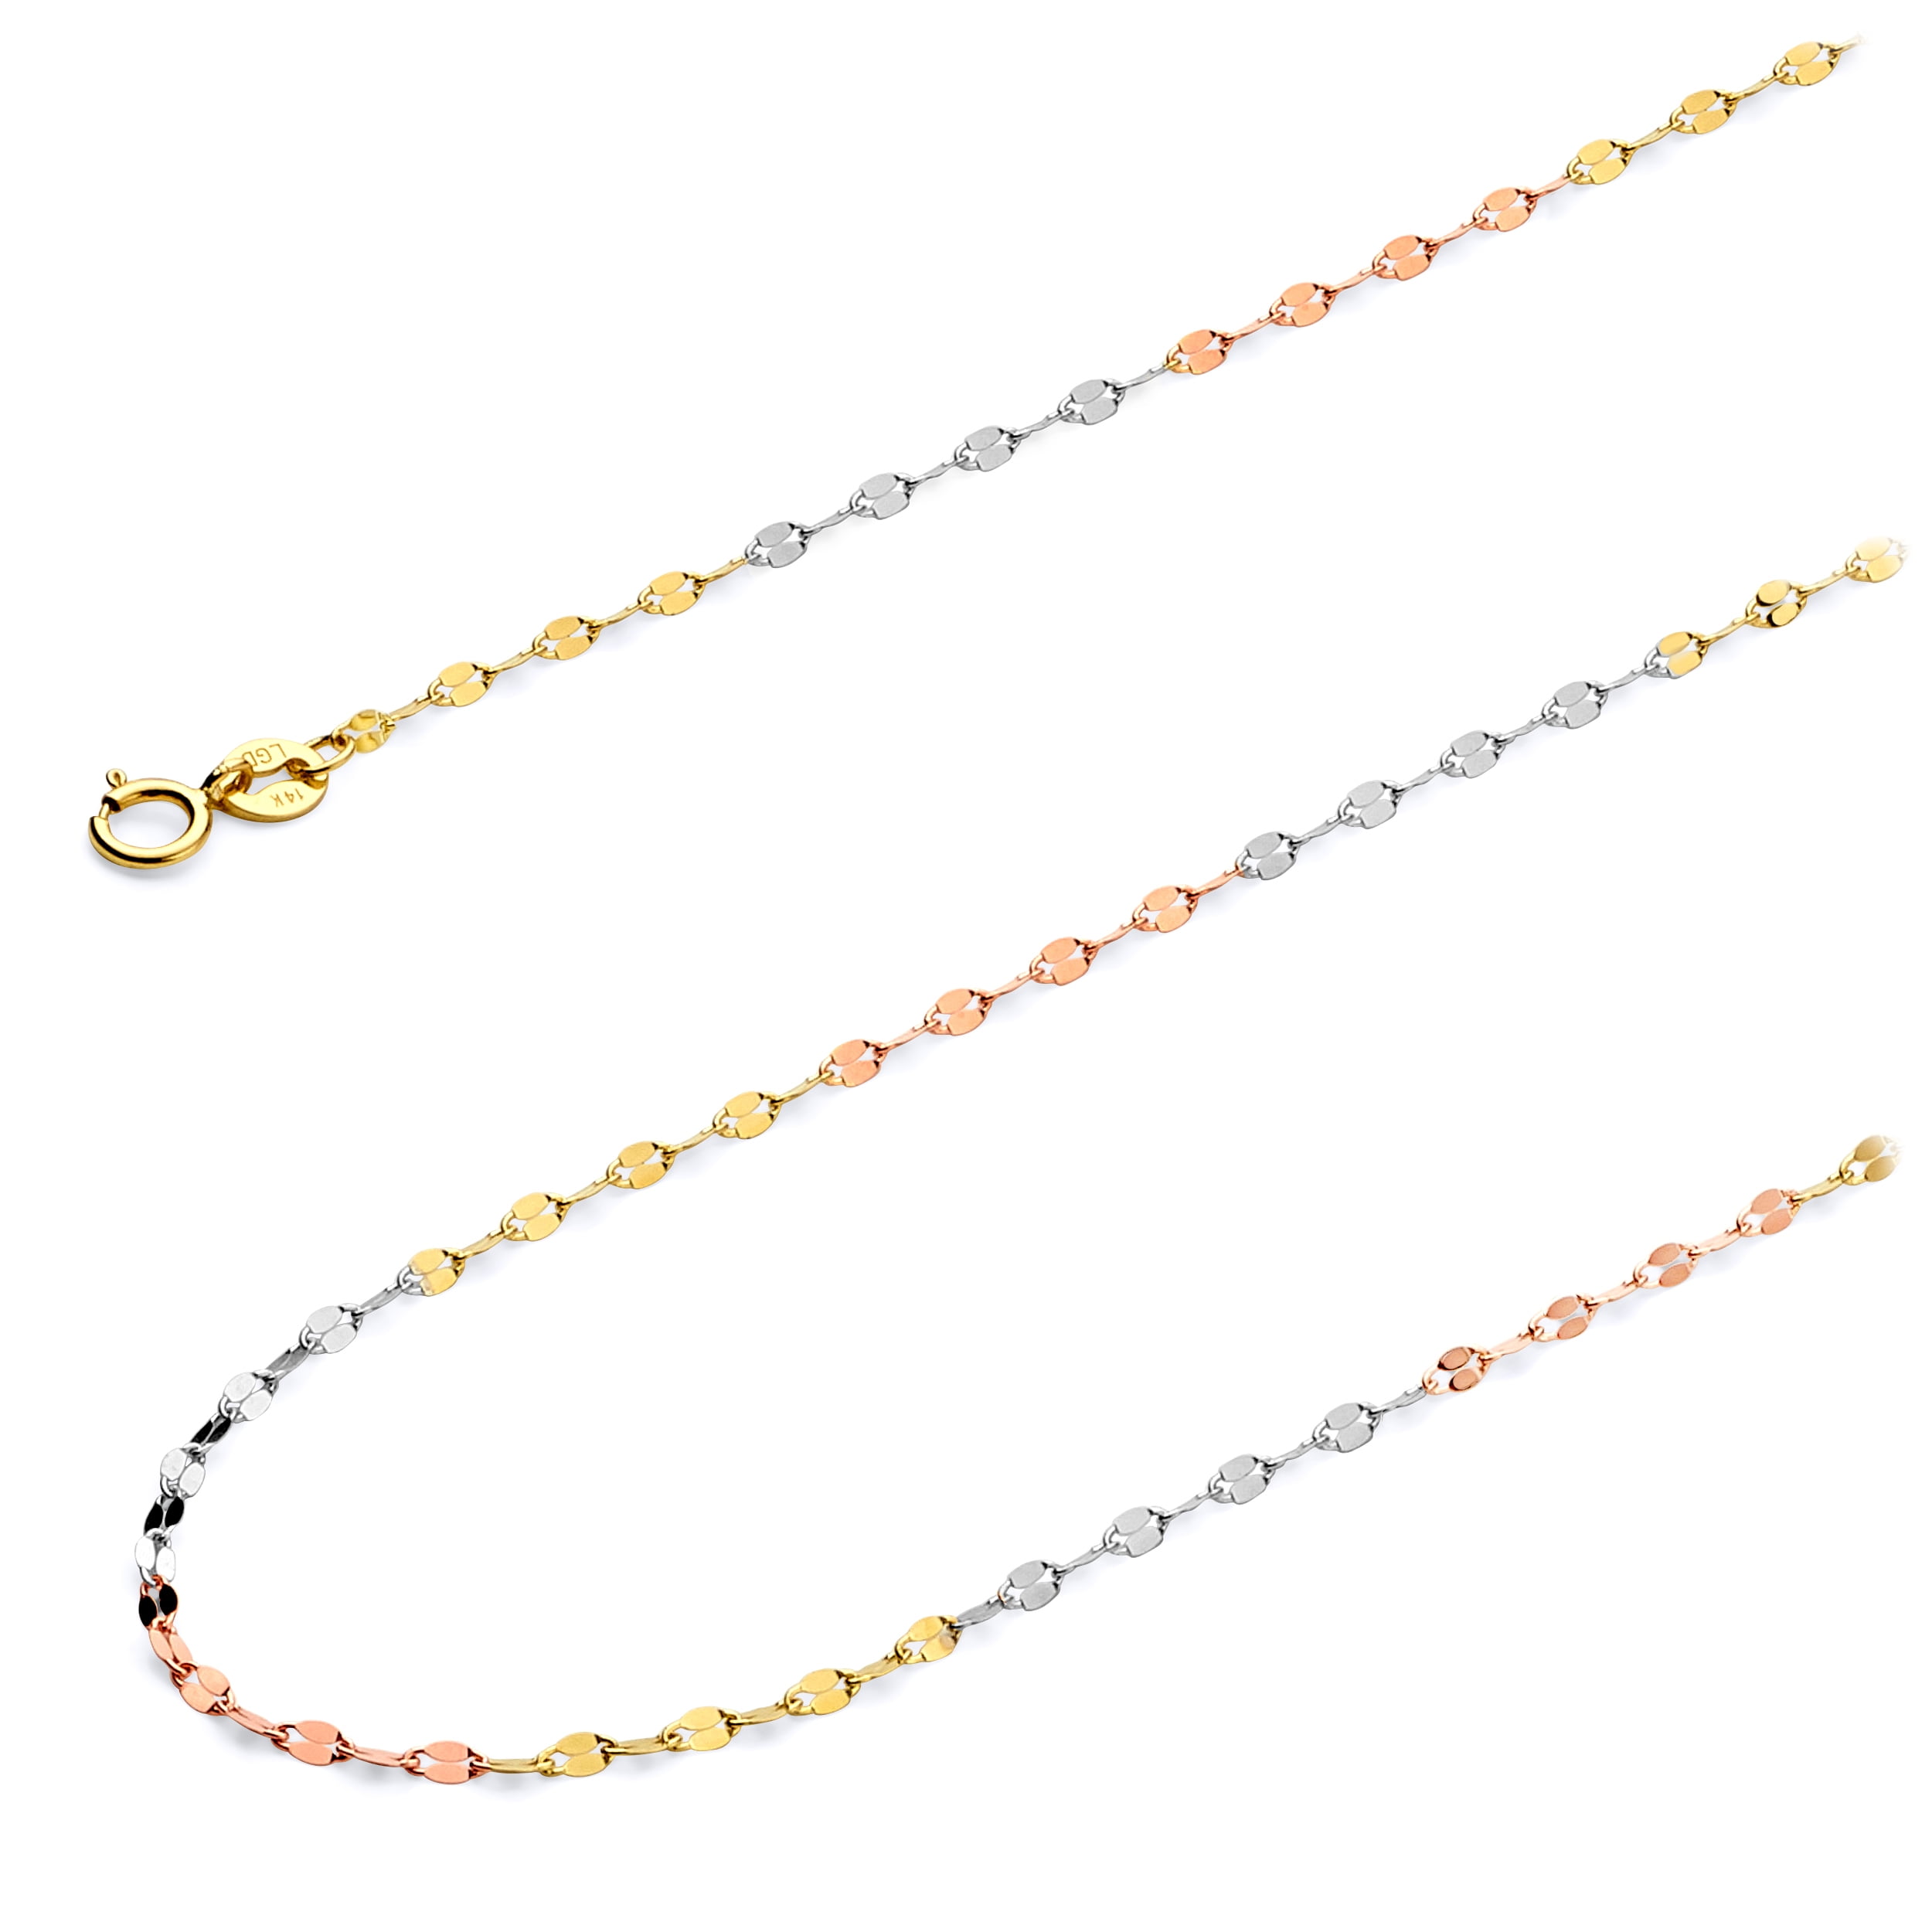 Wellingsale 14k Tri Color Gold Solid 1.5mm Solid Rope Chain Necklace 